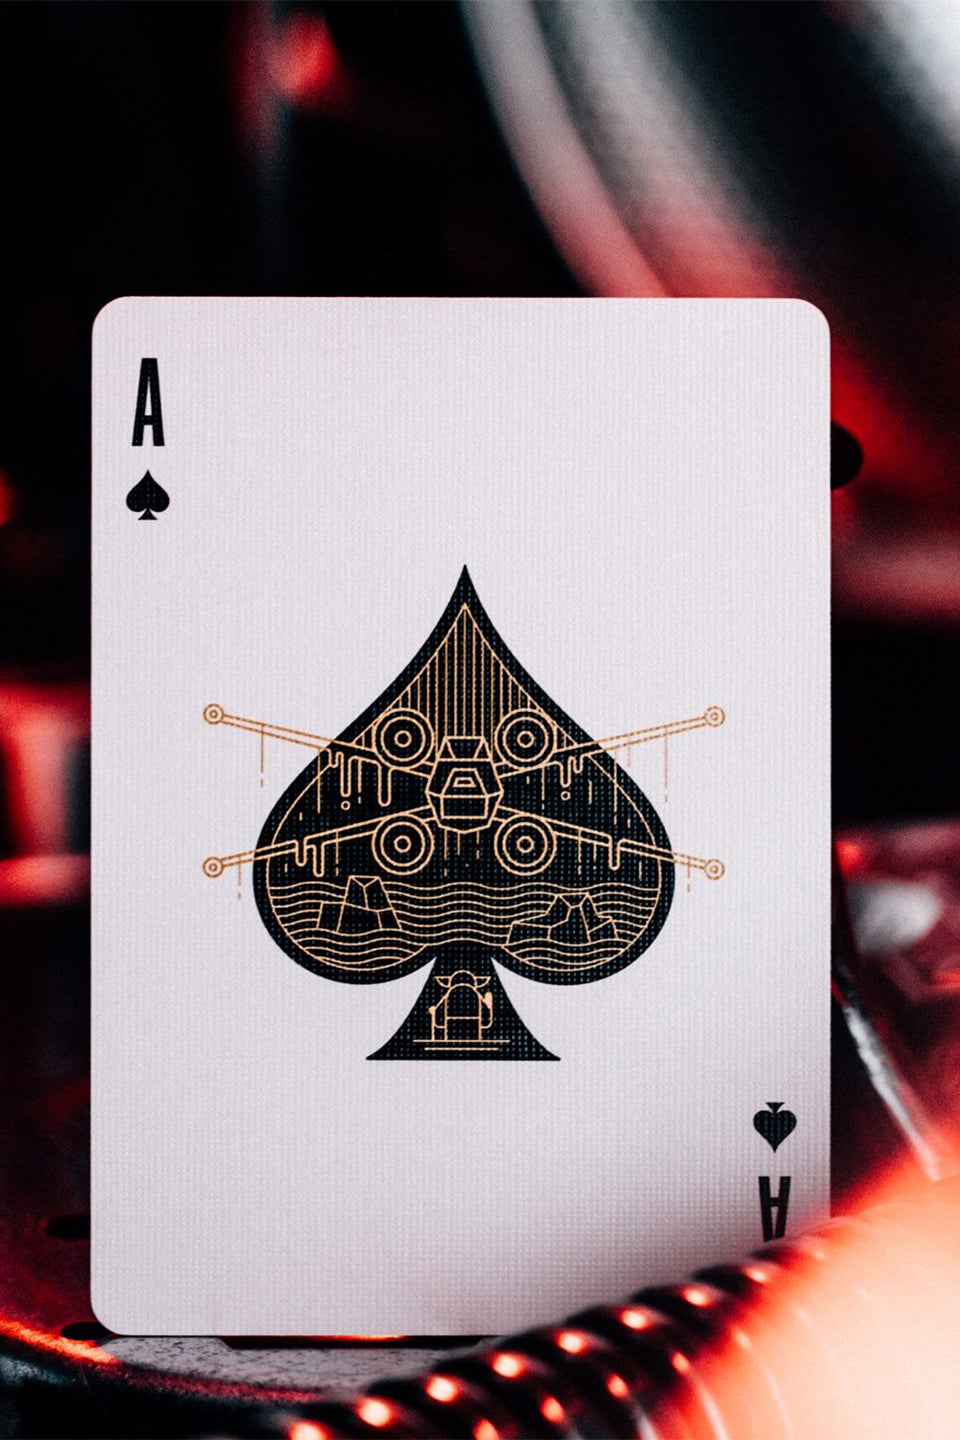 Star Wars Playing Cards - The Dark Side